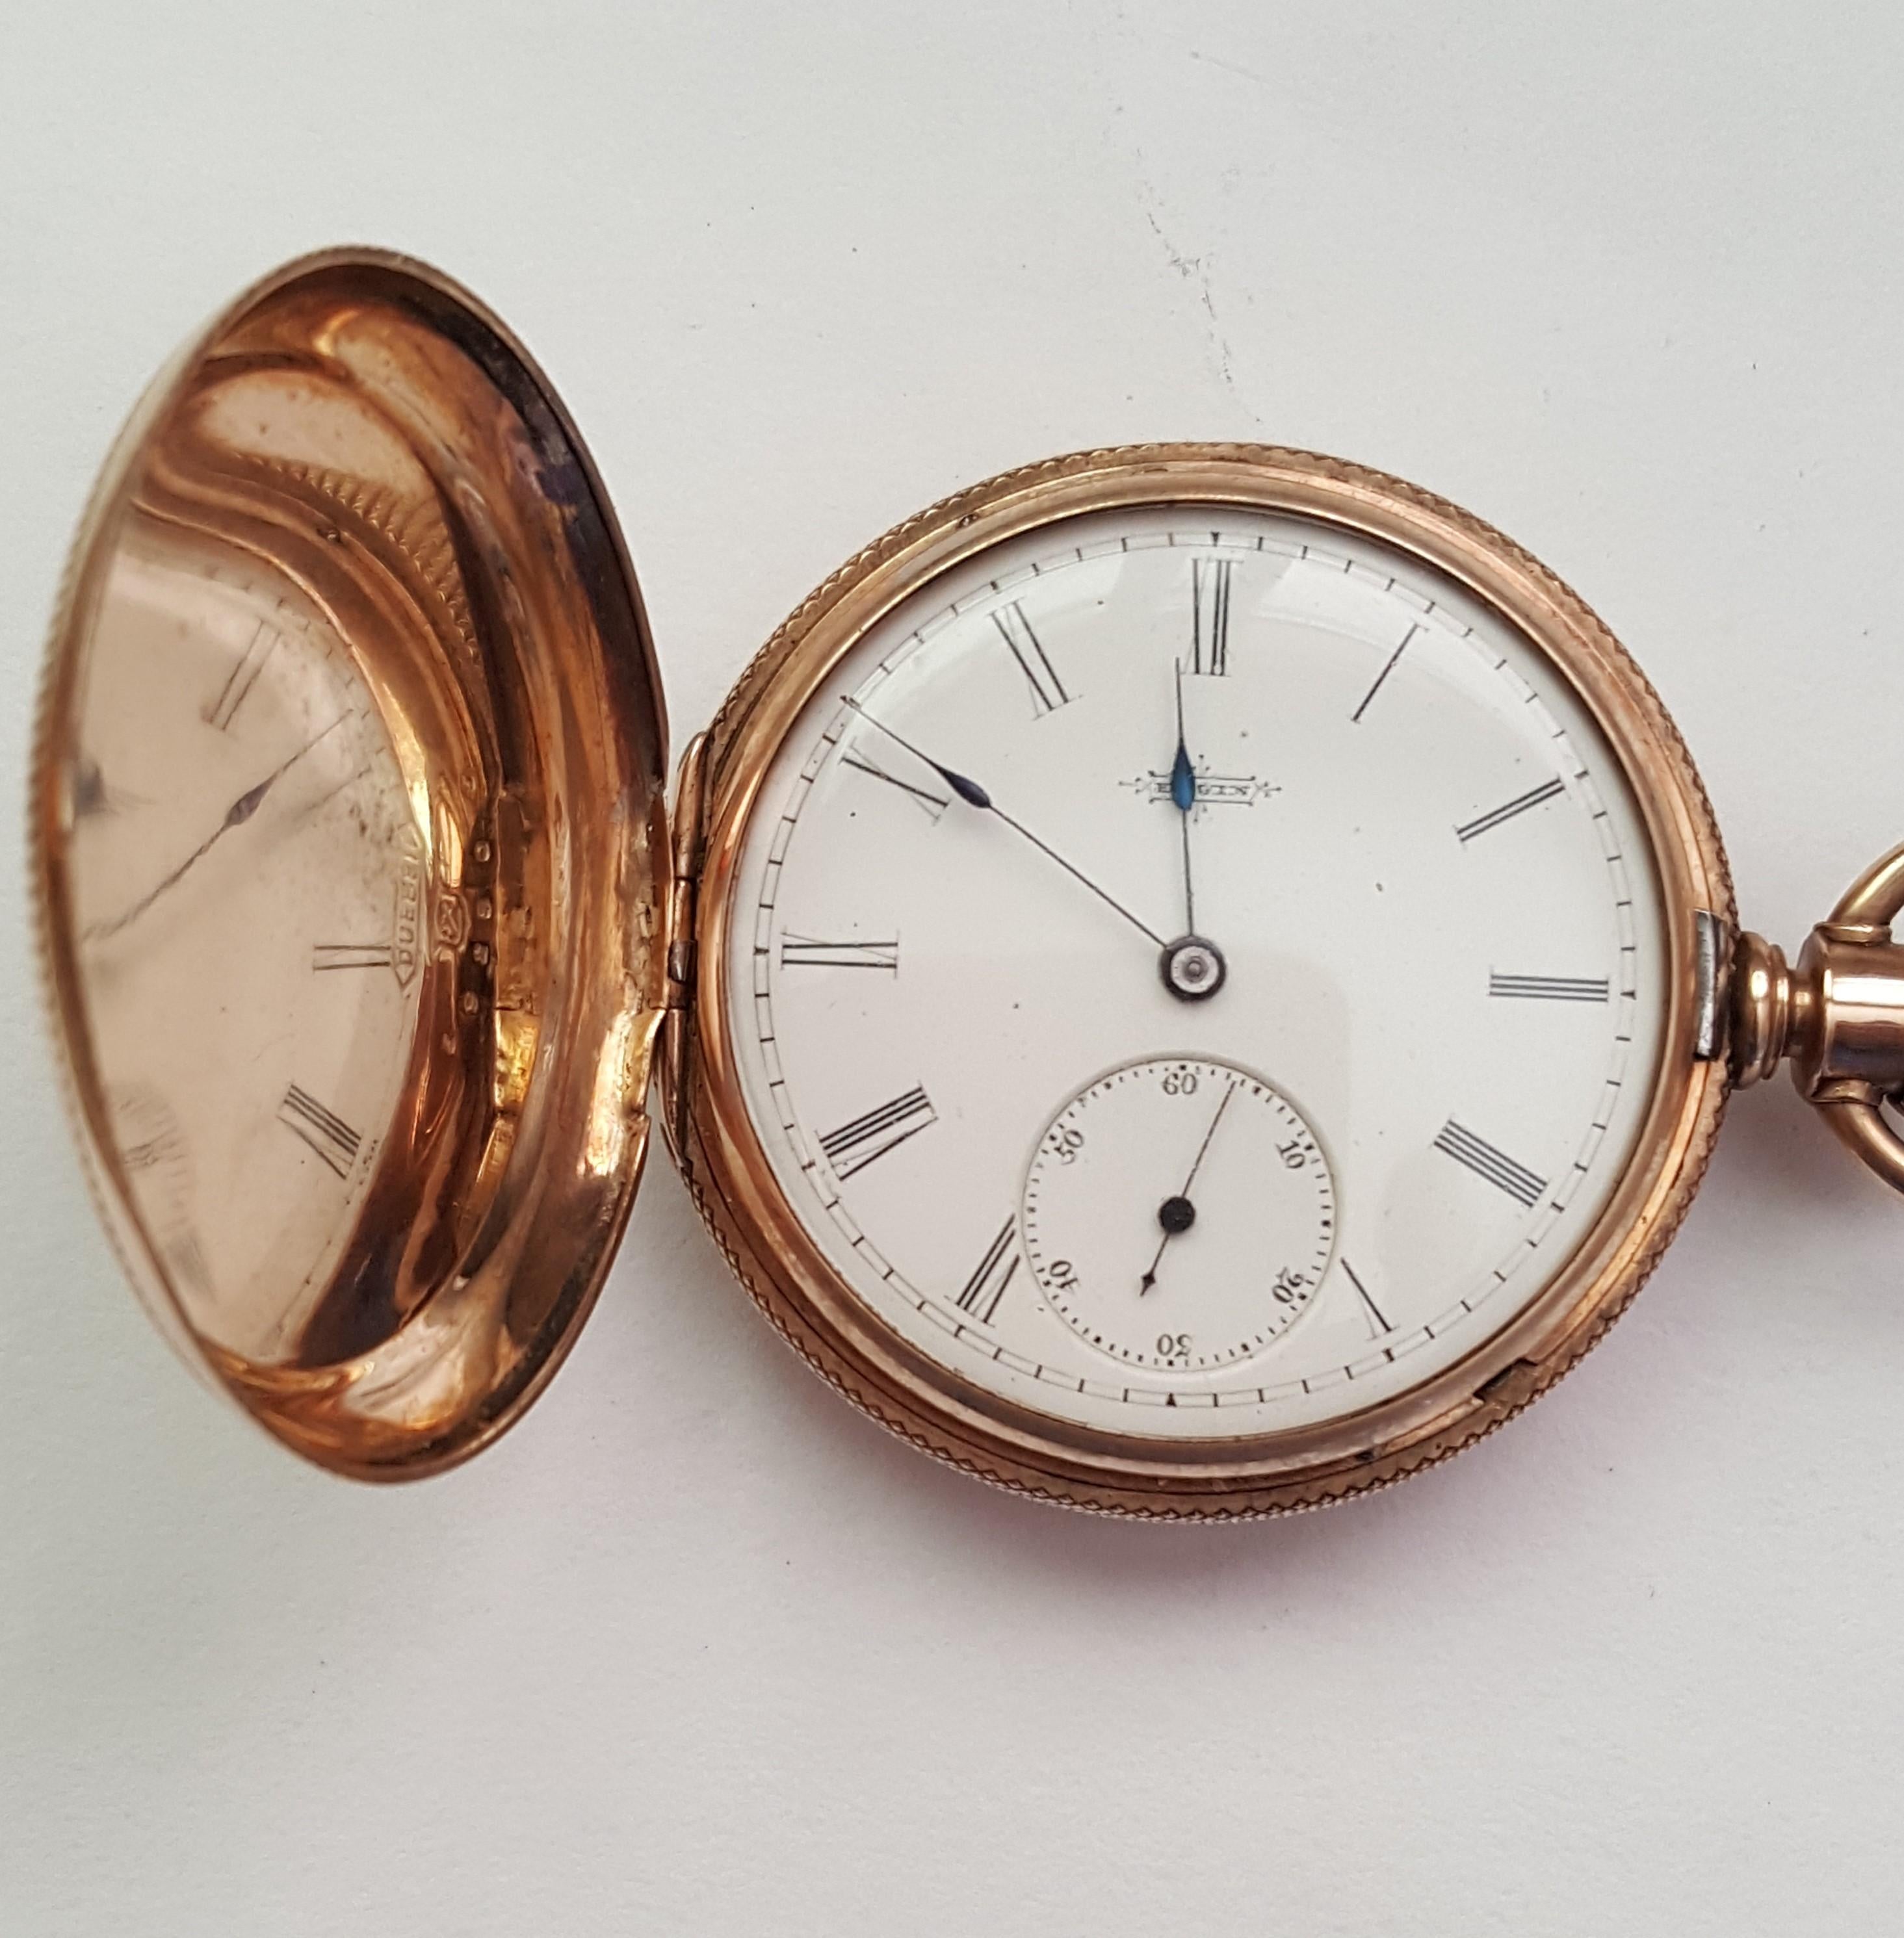 Vintage Gold Plated Elgin Pocket Watch, Year 1883, Working, 11 Jewel, Size 8s, Hunting, Elgin National Watch Company, American Co. 41mm Case. Beautiful working condition, black Roman numerals with white face. Second hand works too. Hands are a nice